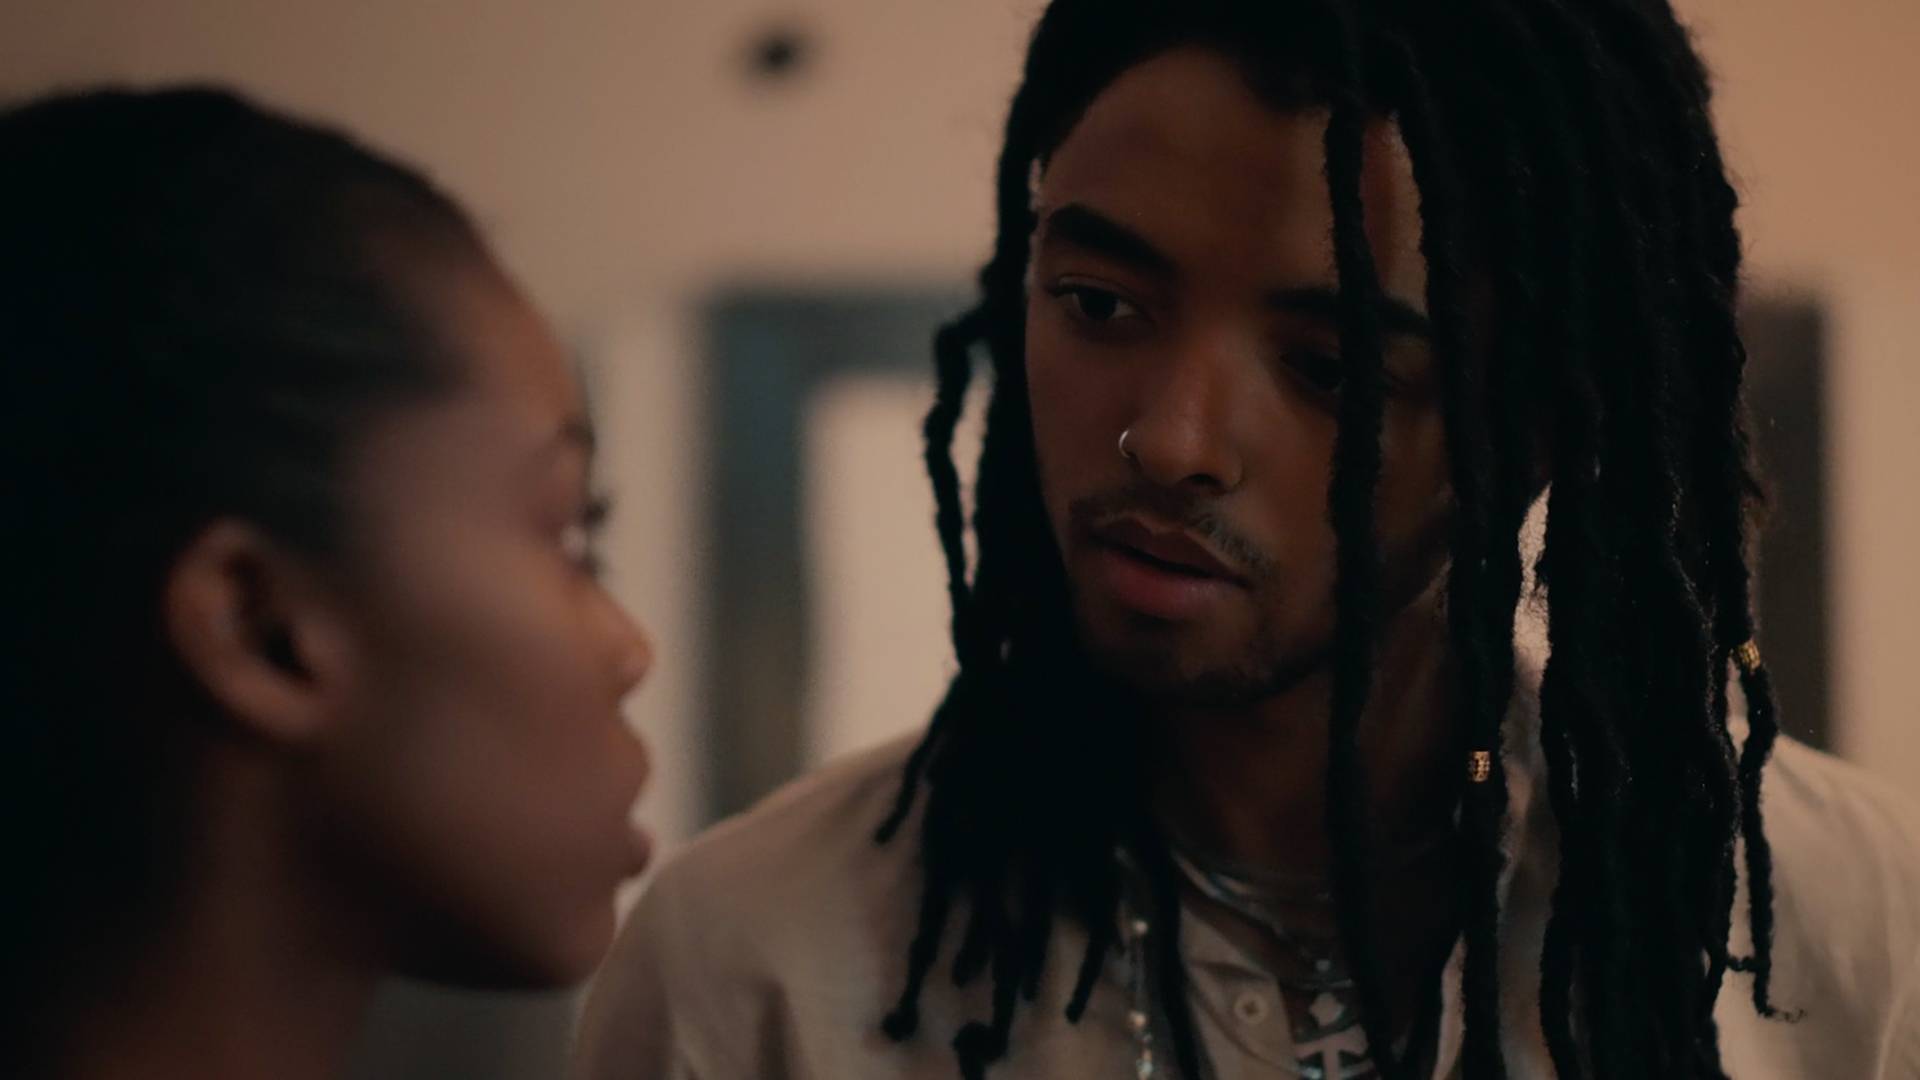 A young artist falls in love with a mysterious man on BET's Tales.